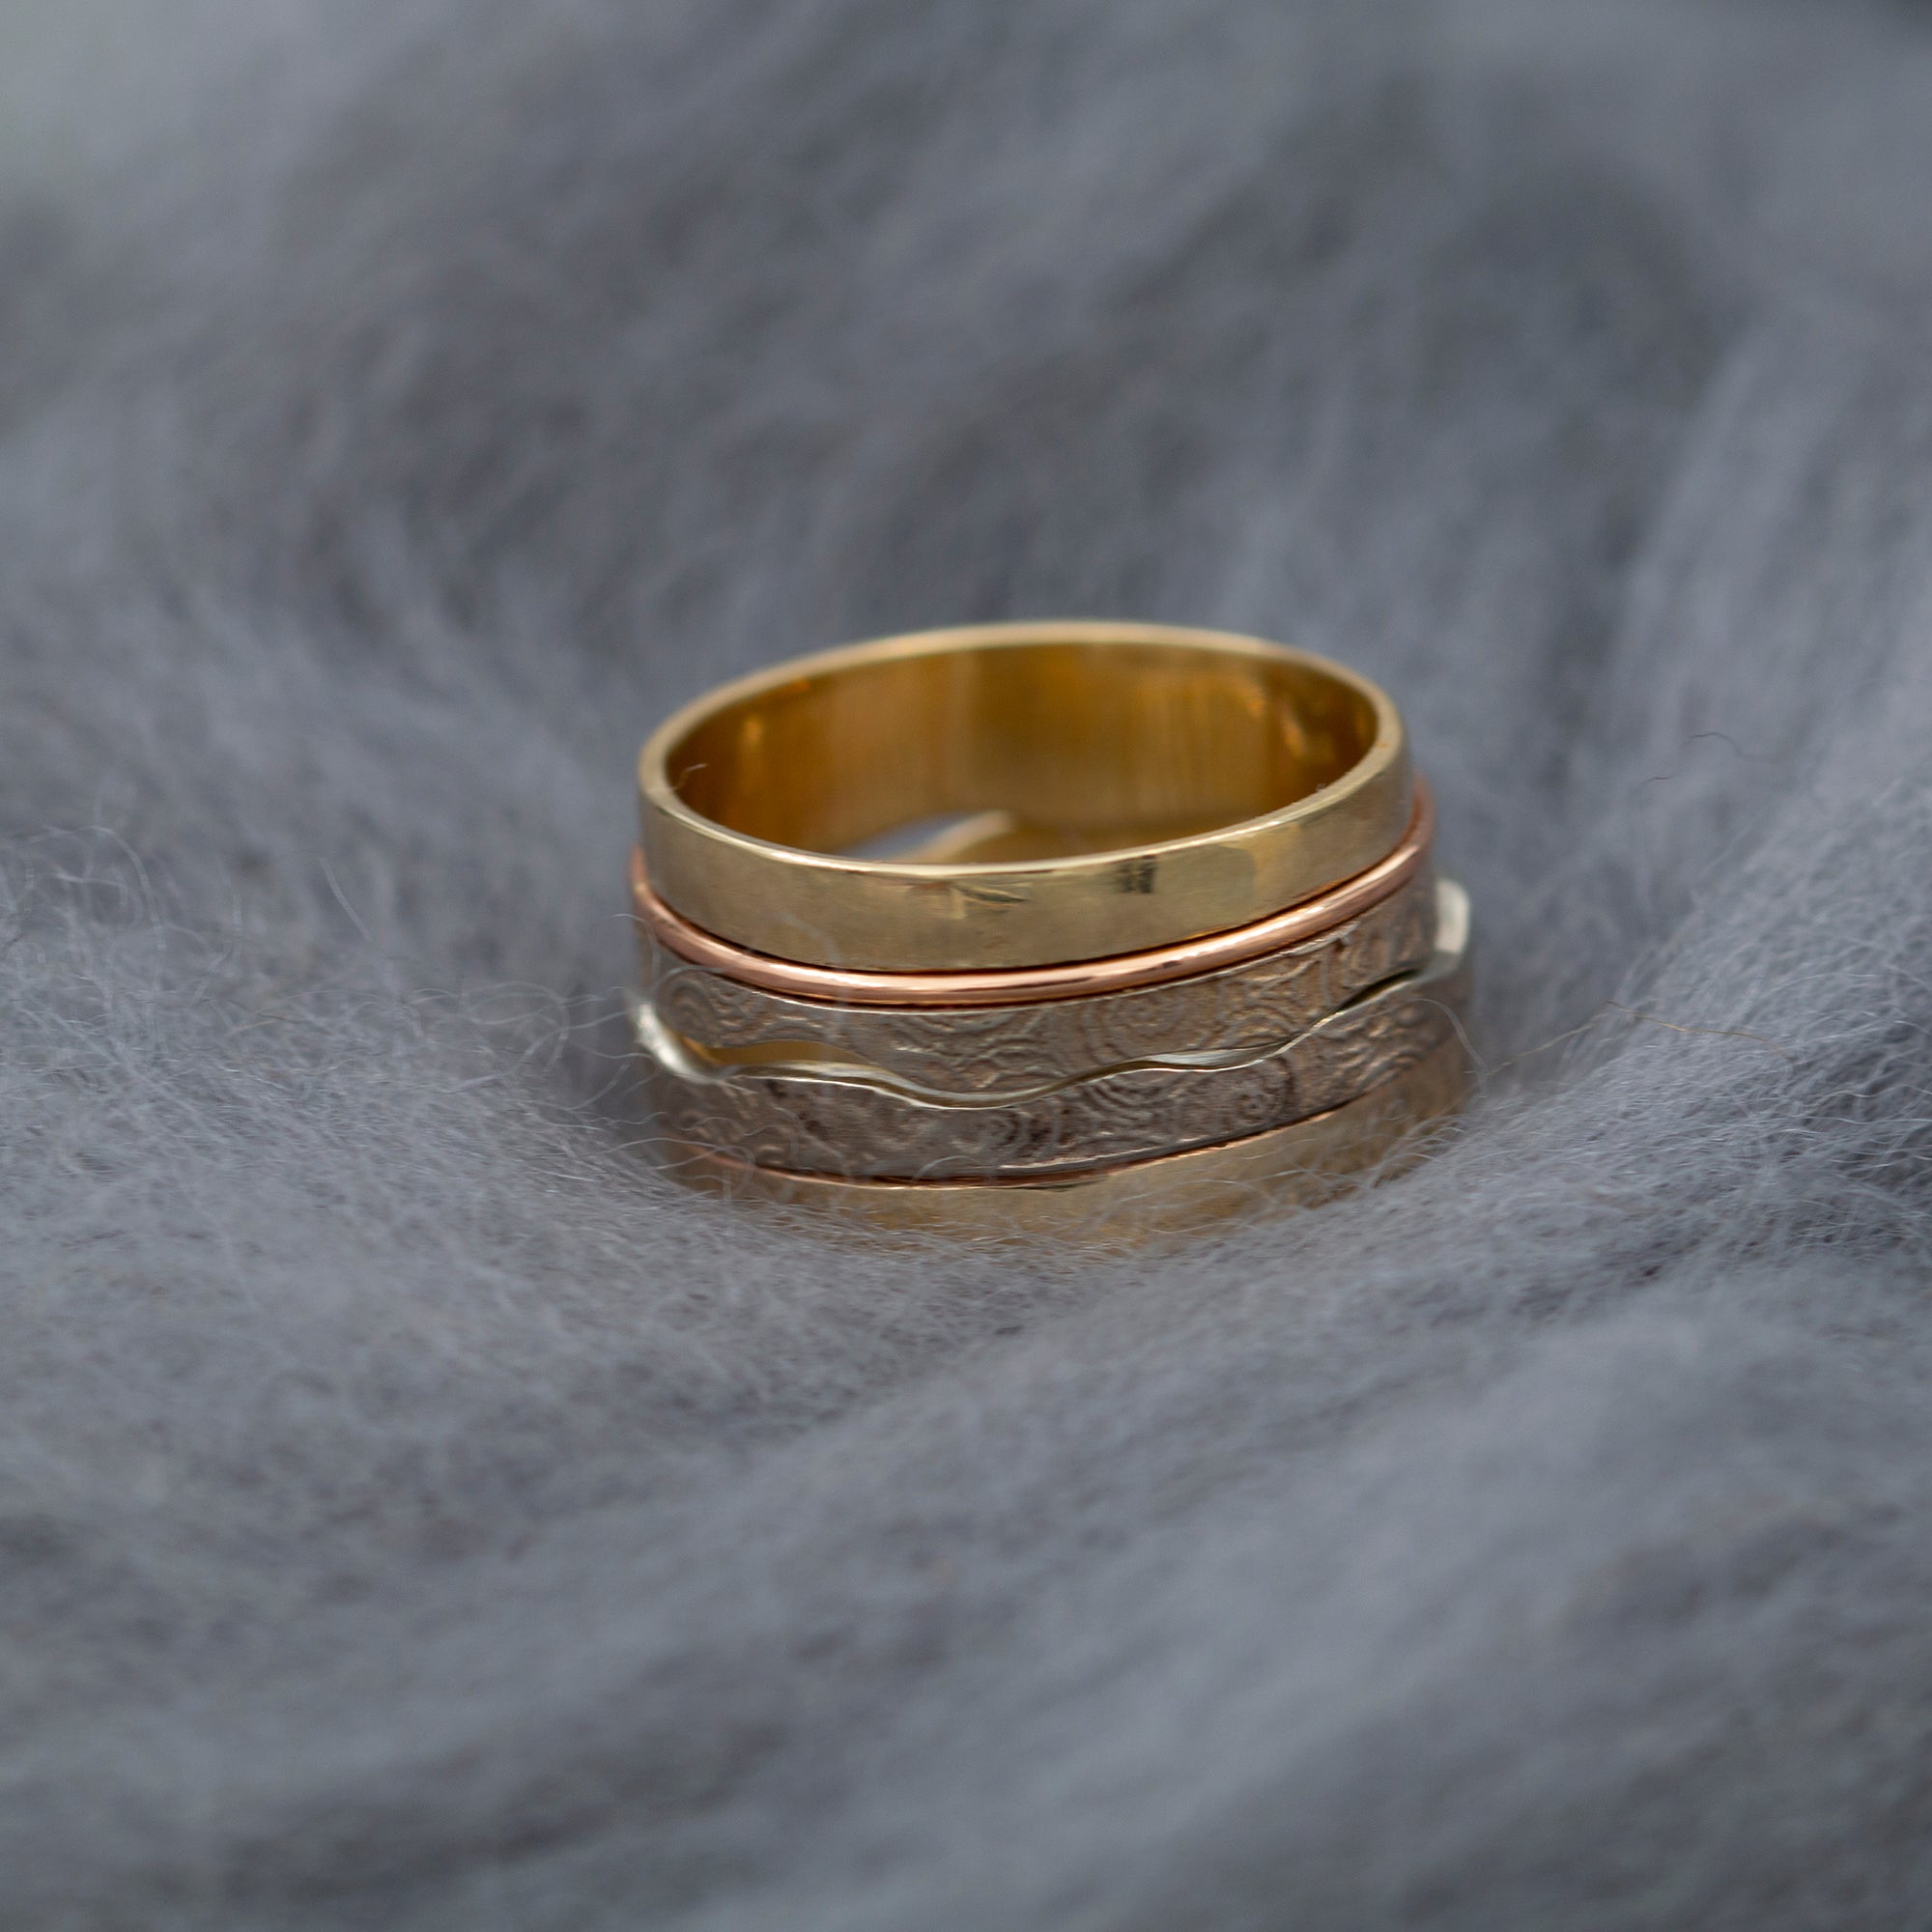 Tri Color Wedding Bands In 14K Solid Gold, Couples Matching Ring, Matching Ring Set, His And Her Band Set, Spiral Textured Gold Rings